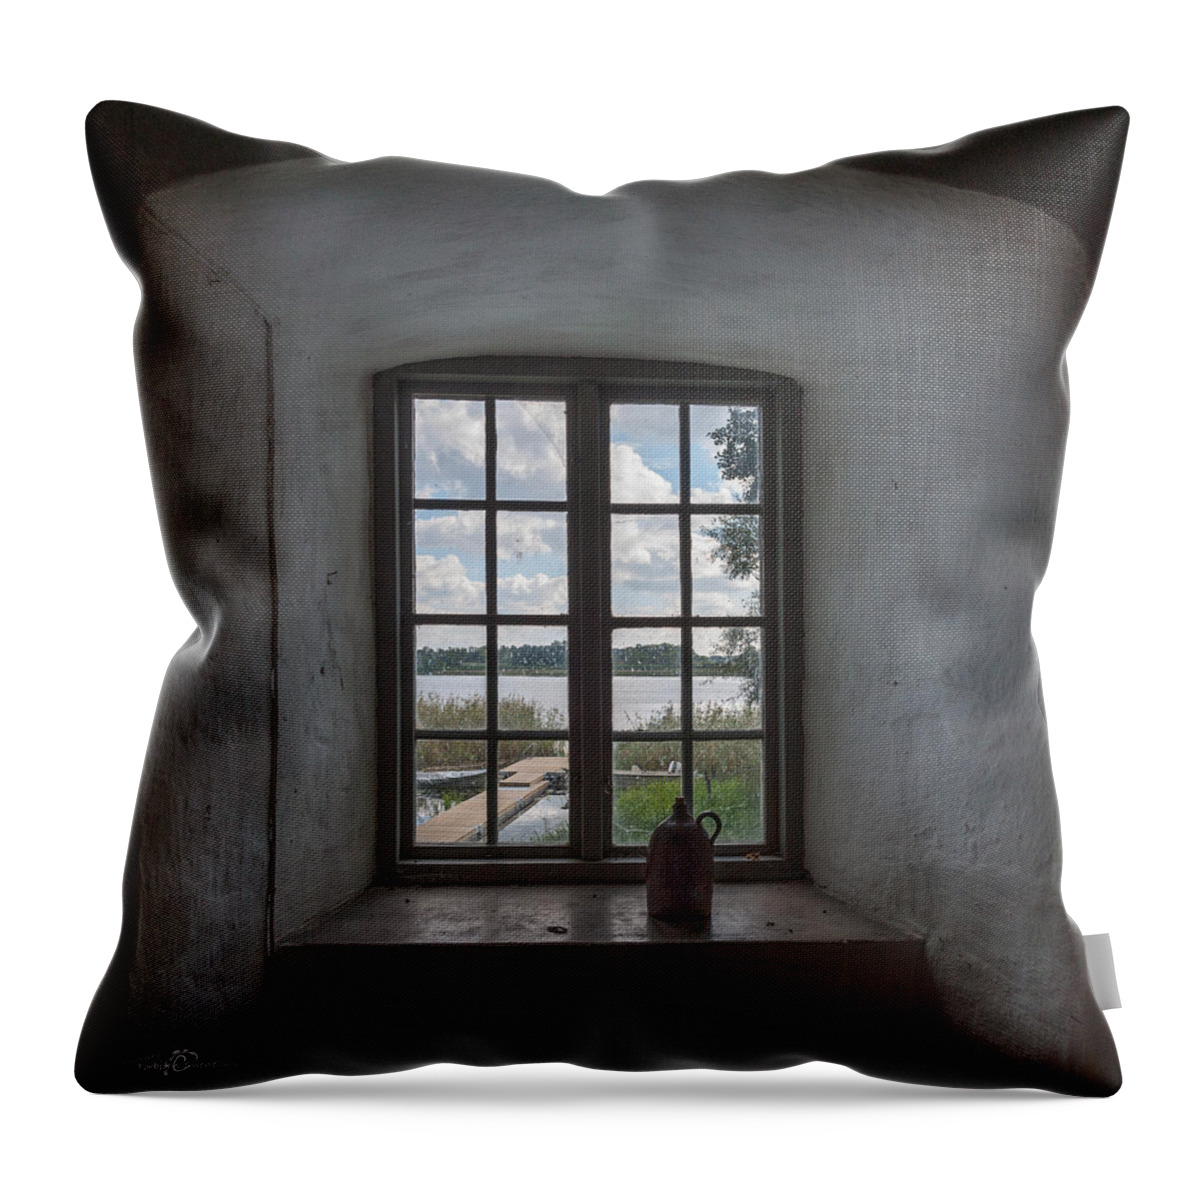 Outlook Throw Pillow featuring the photograph Outlook by Torbjorn Swenelius